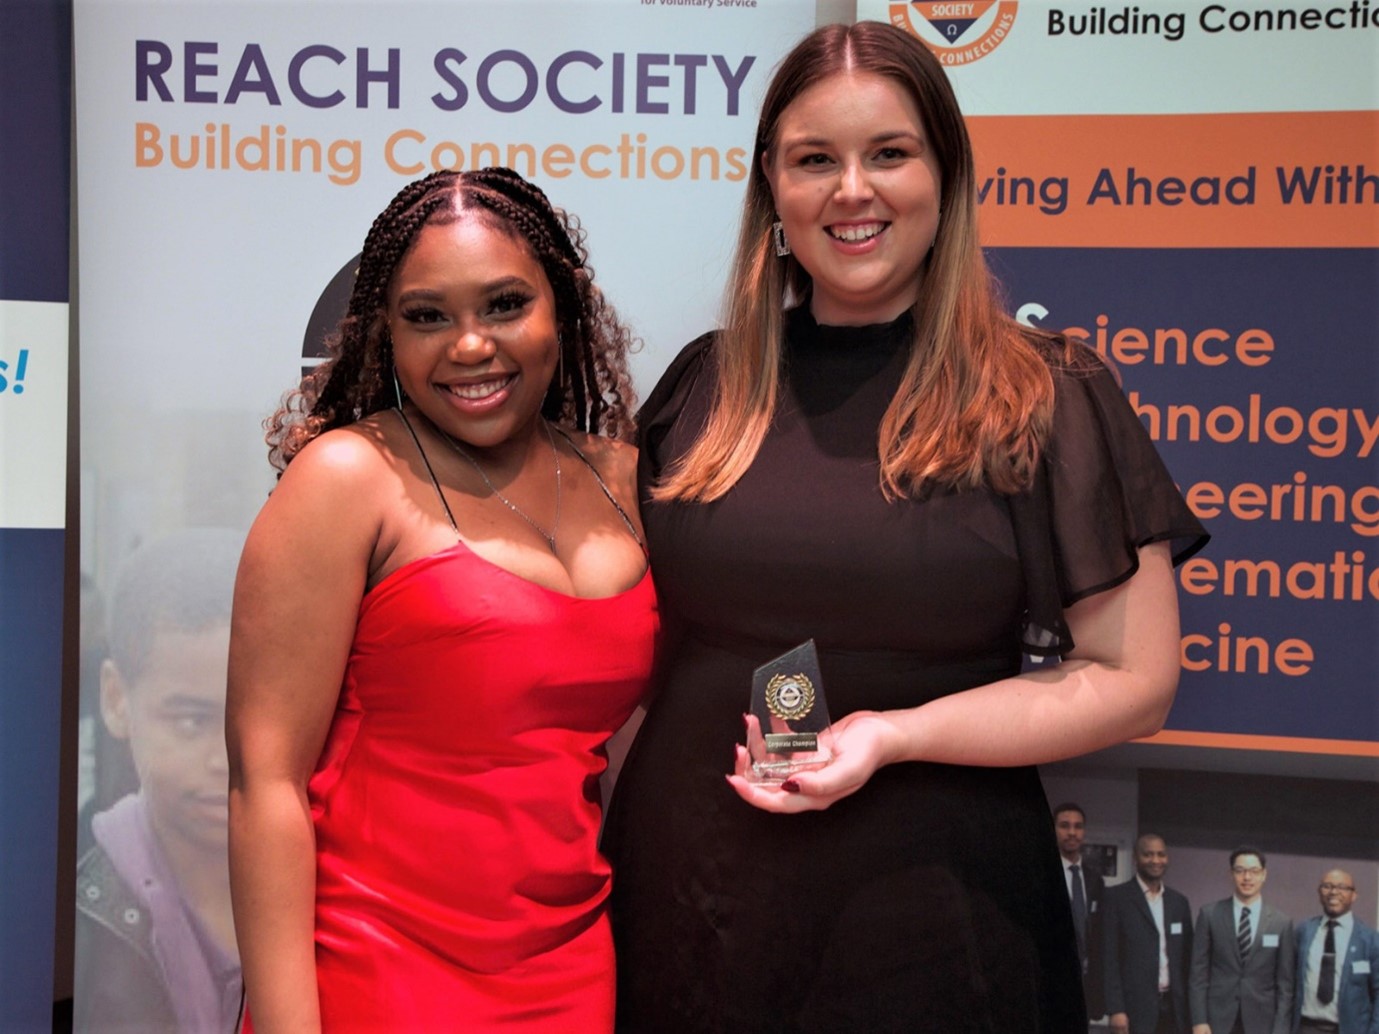 A student in a red dress with a member of staff wearing black, receiving the Reach Society Award